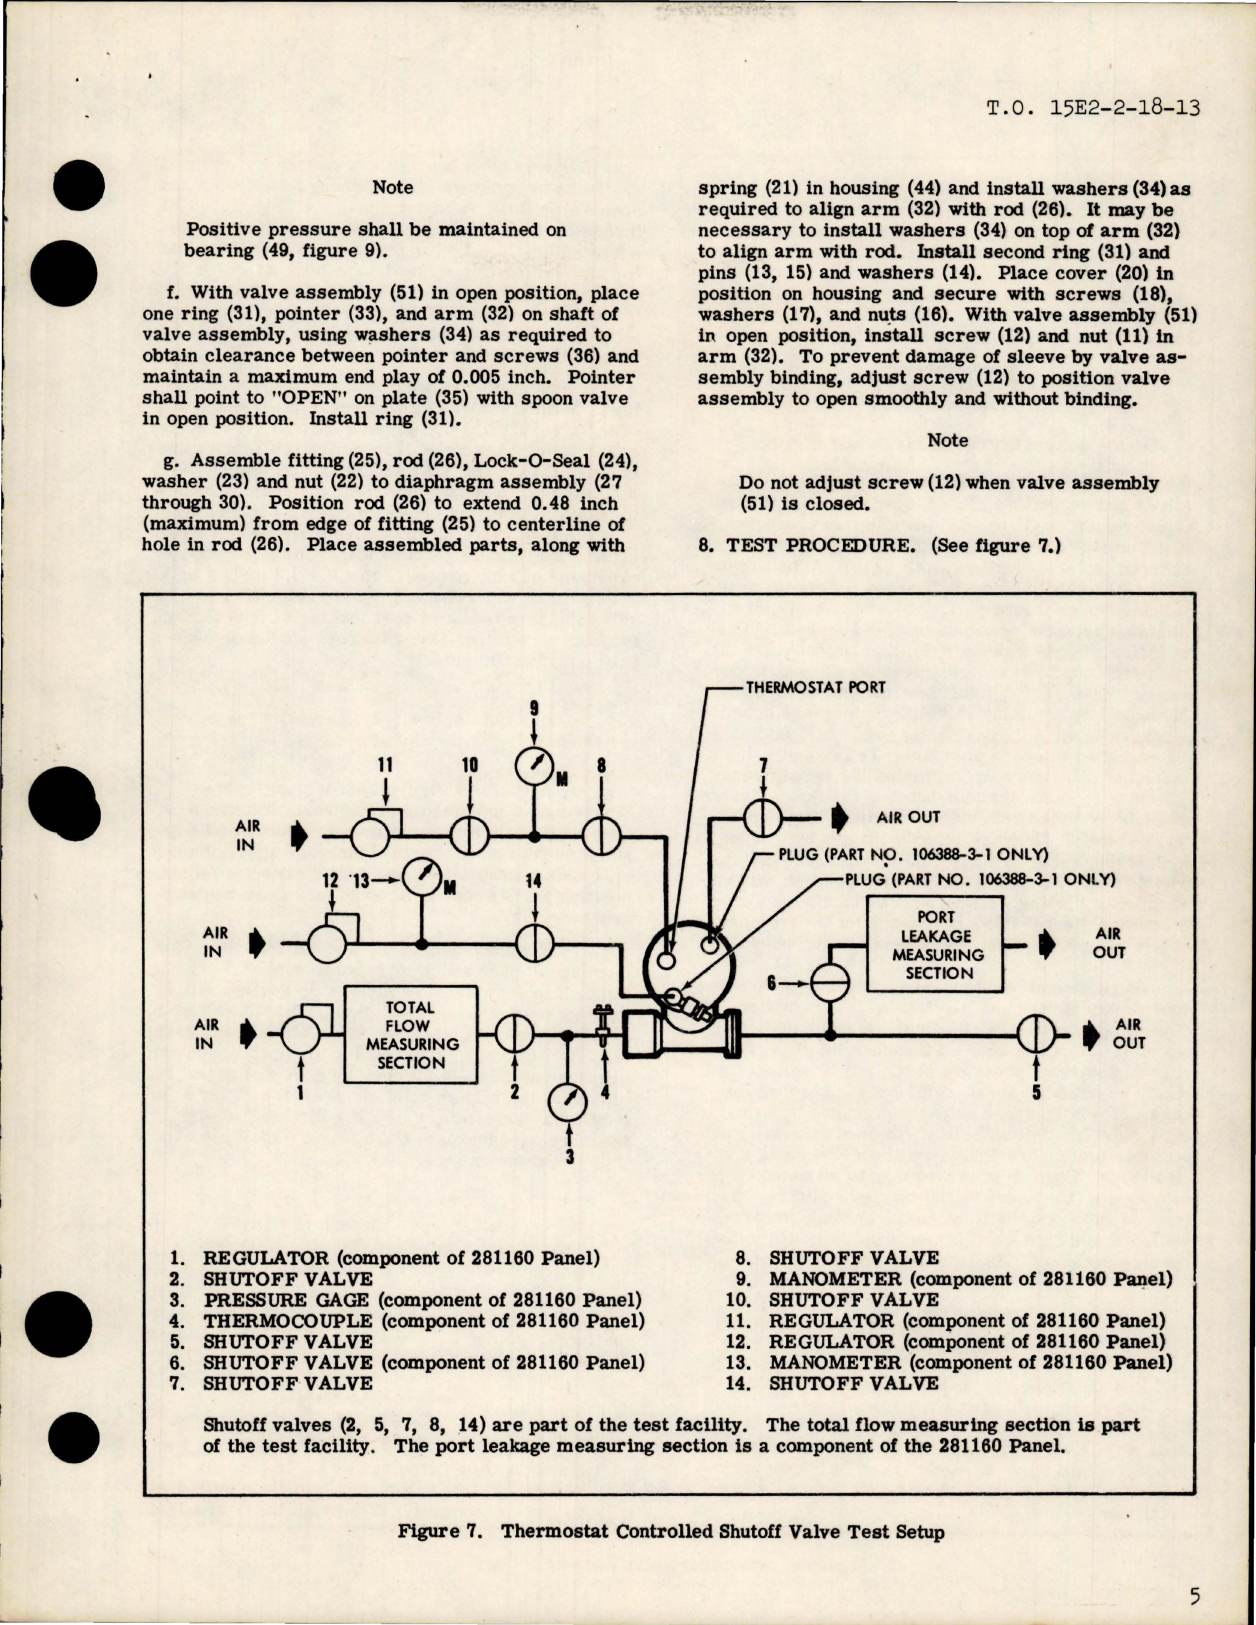 Sample page 7 from AirCorps Library document: Overhaul Instructions with Parts for Thermostat Controlled Shutoff Valve - Parts 106388, 106388-1-2, and 106388-3-1